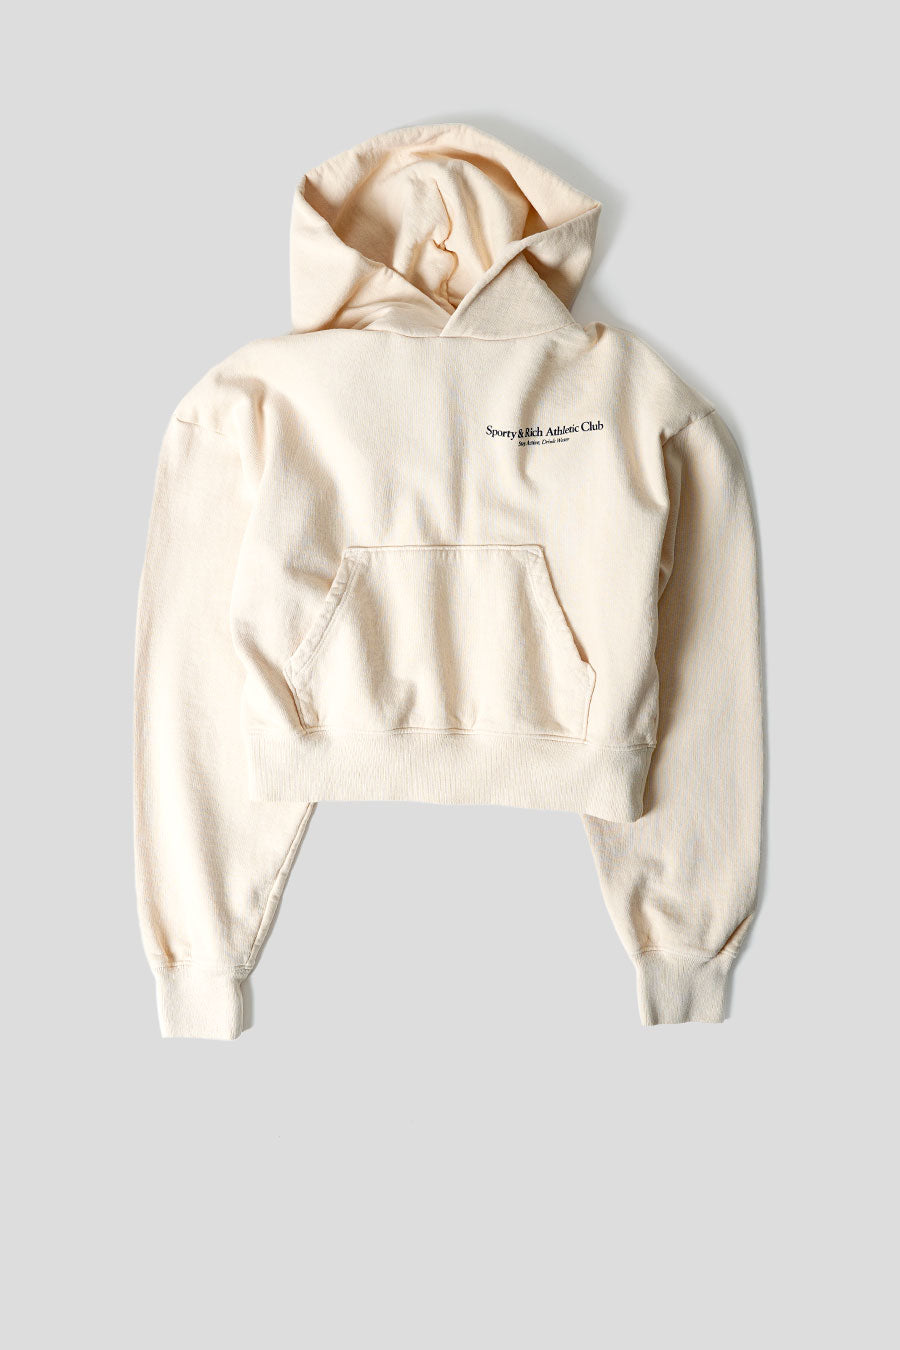 Sporty & Rich - CREAM ATHLETIC CLUB HOODIE – LE LABO STORE